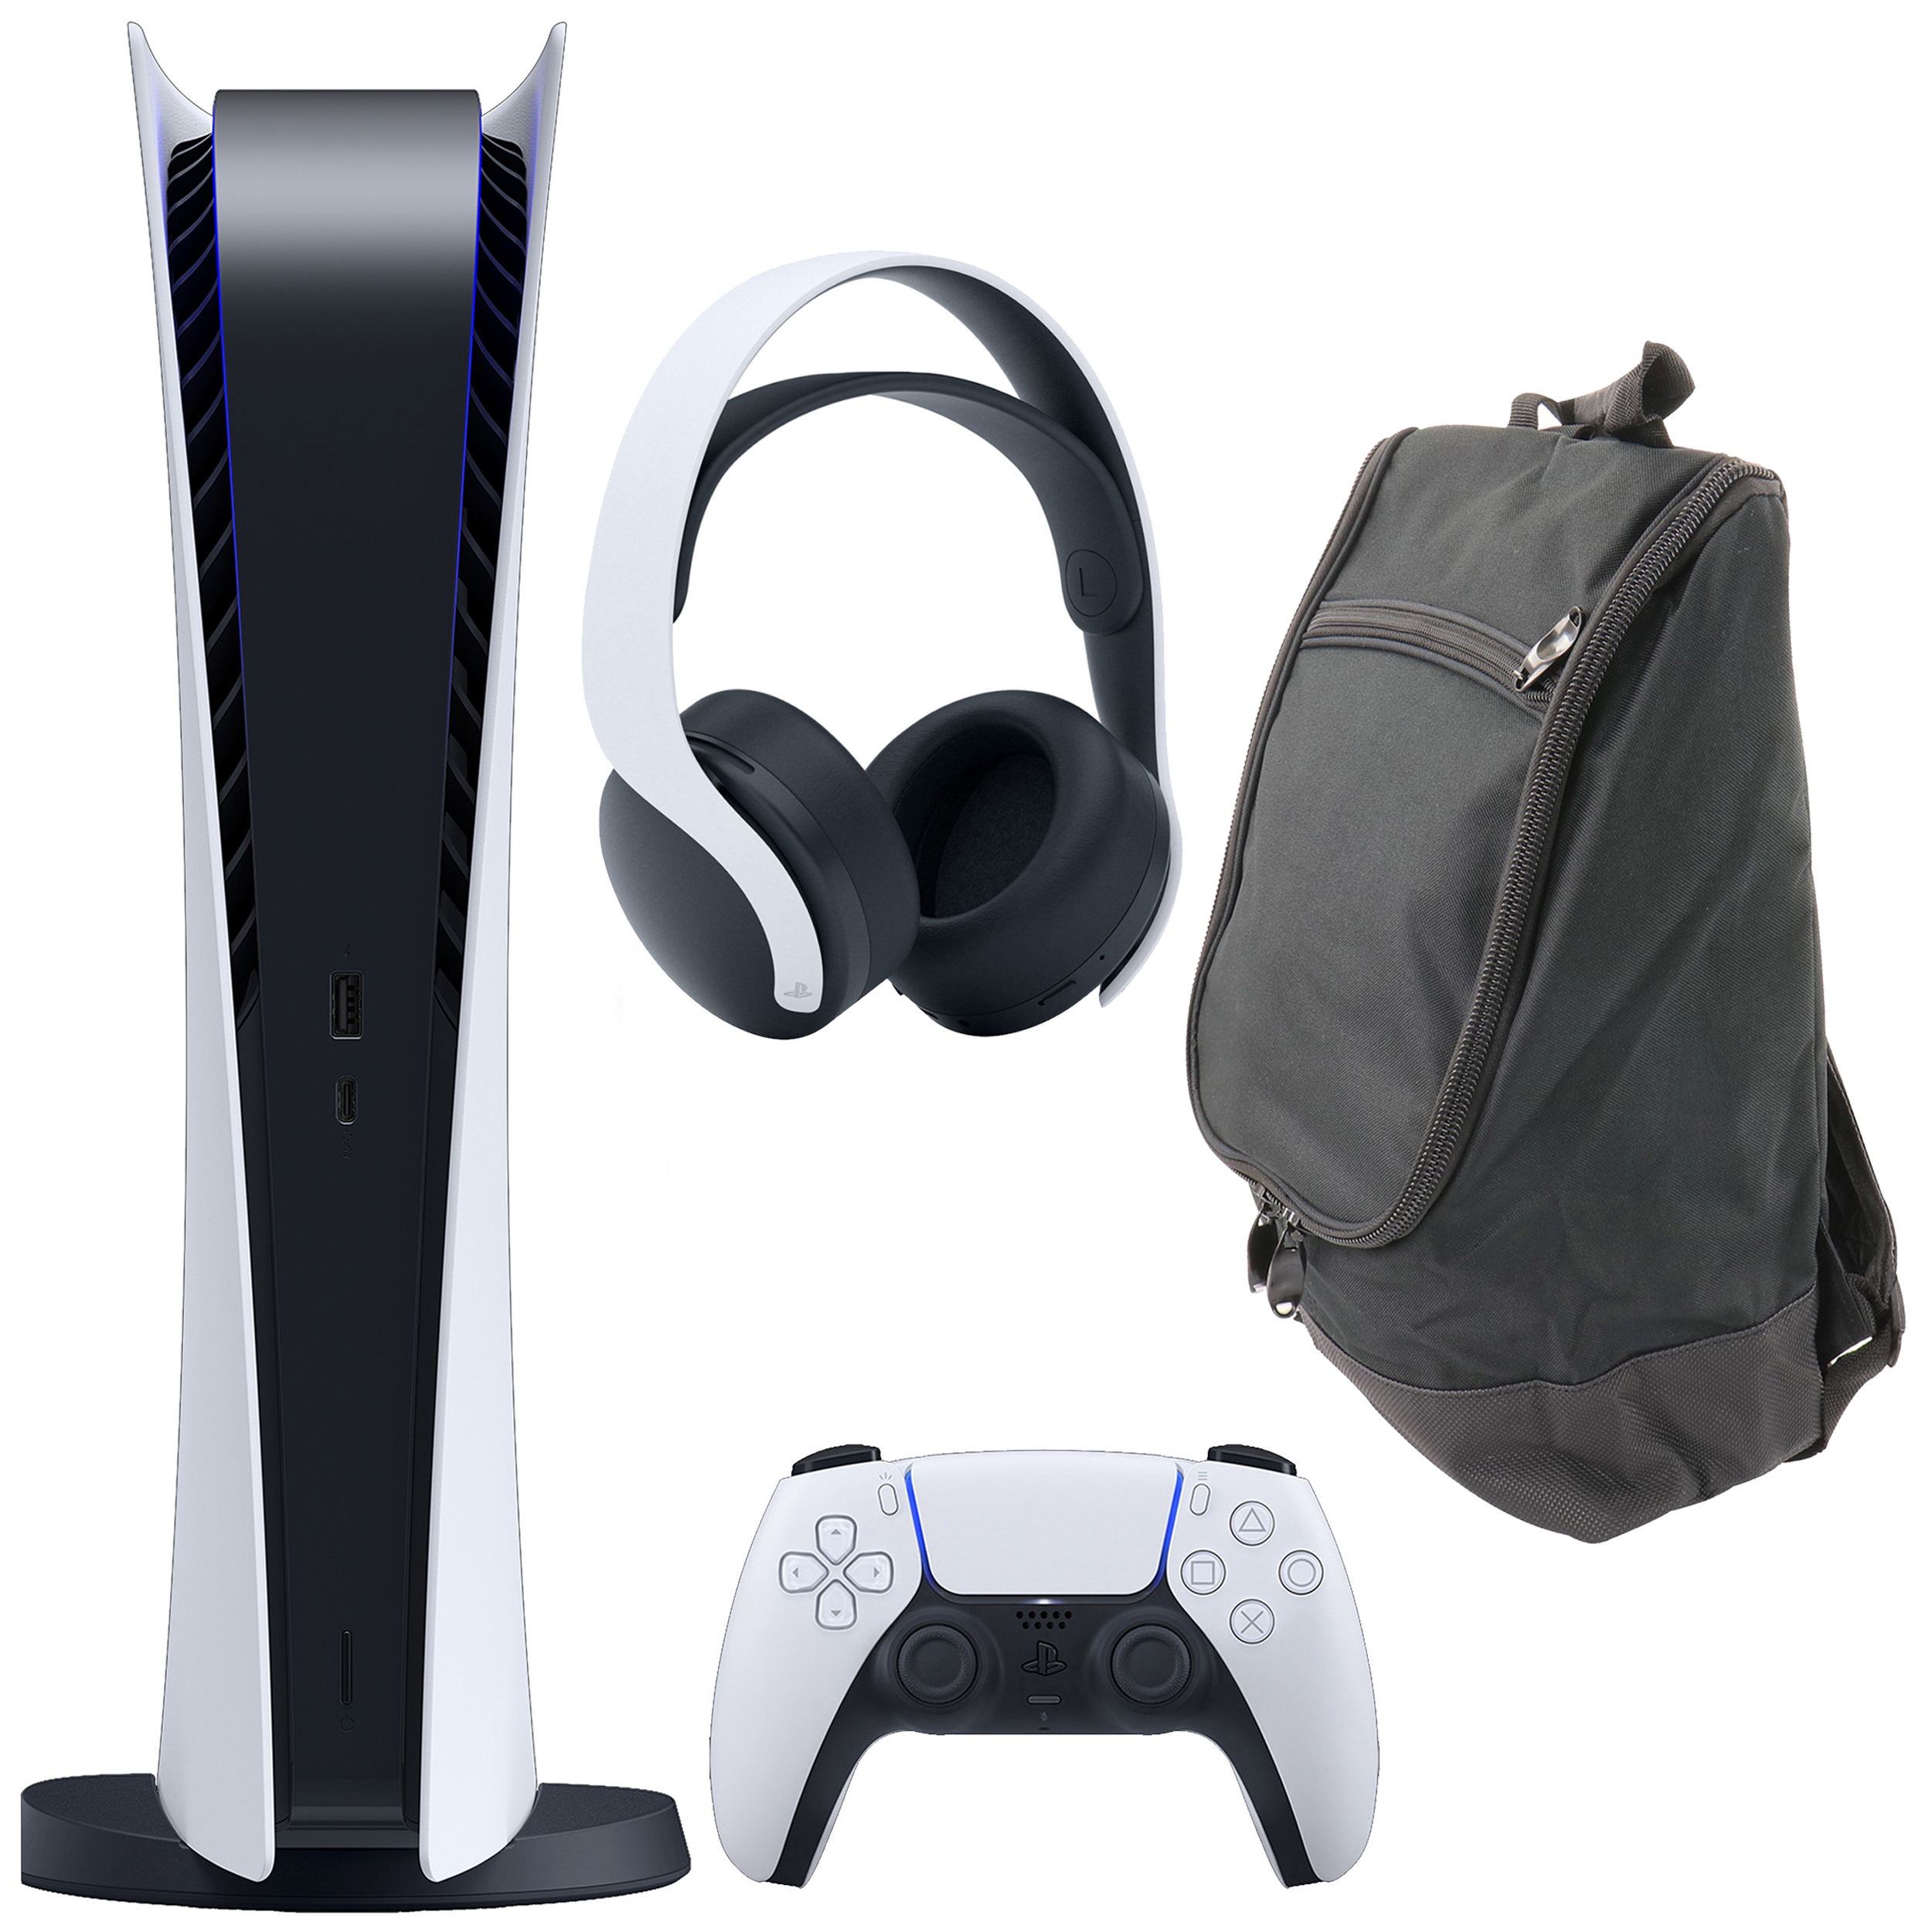 Sony PlayStation 5 Digital Console with Pulse Headset and Carry Bag (PS5 Digital Console)